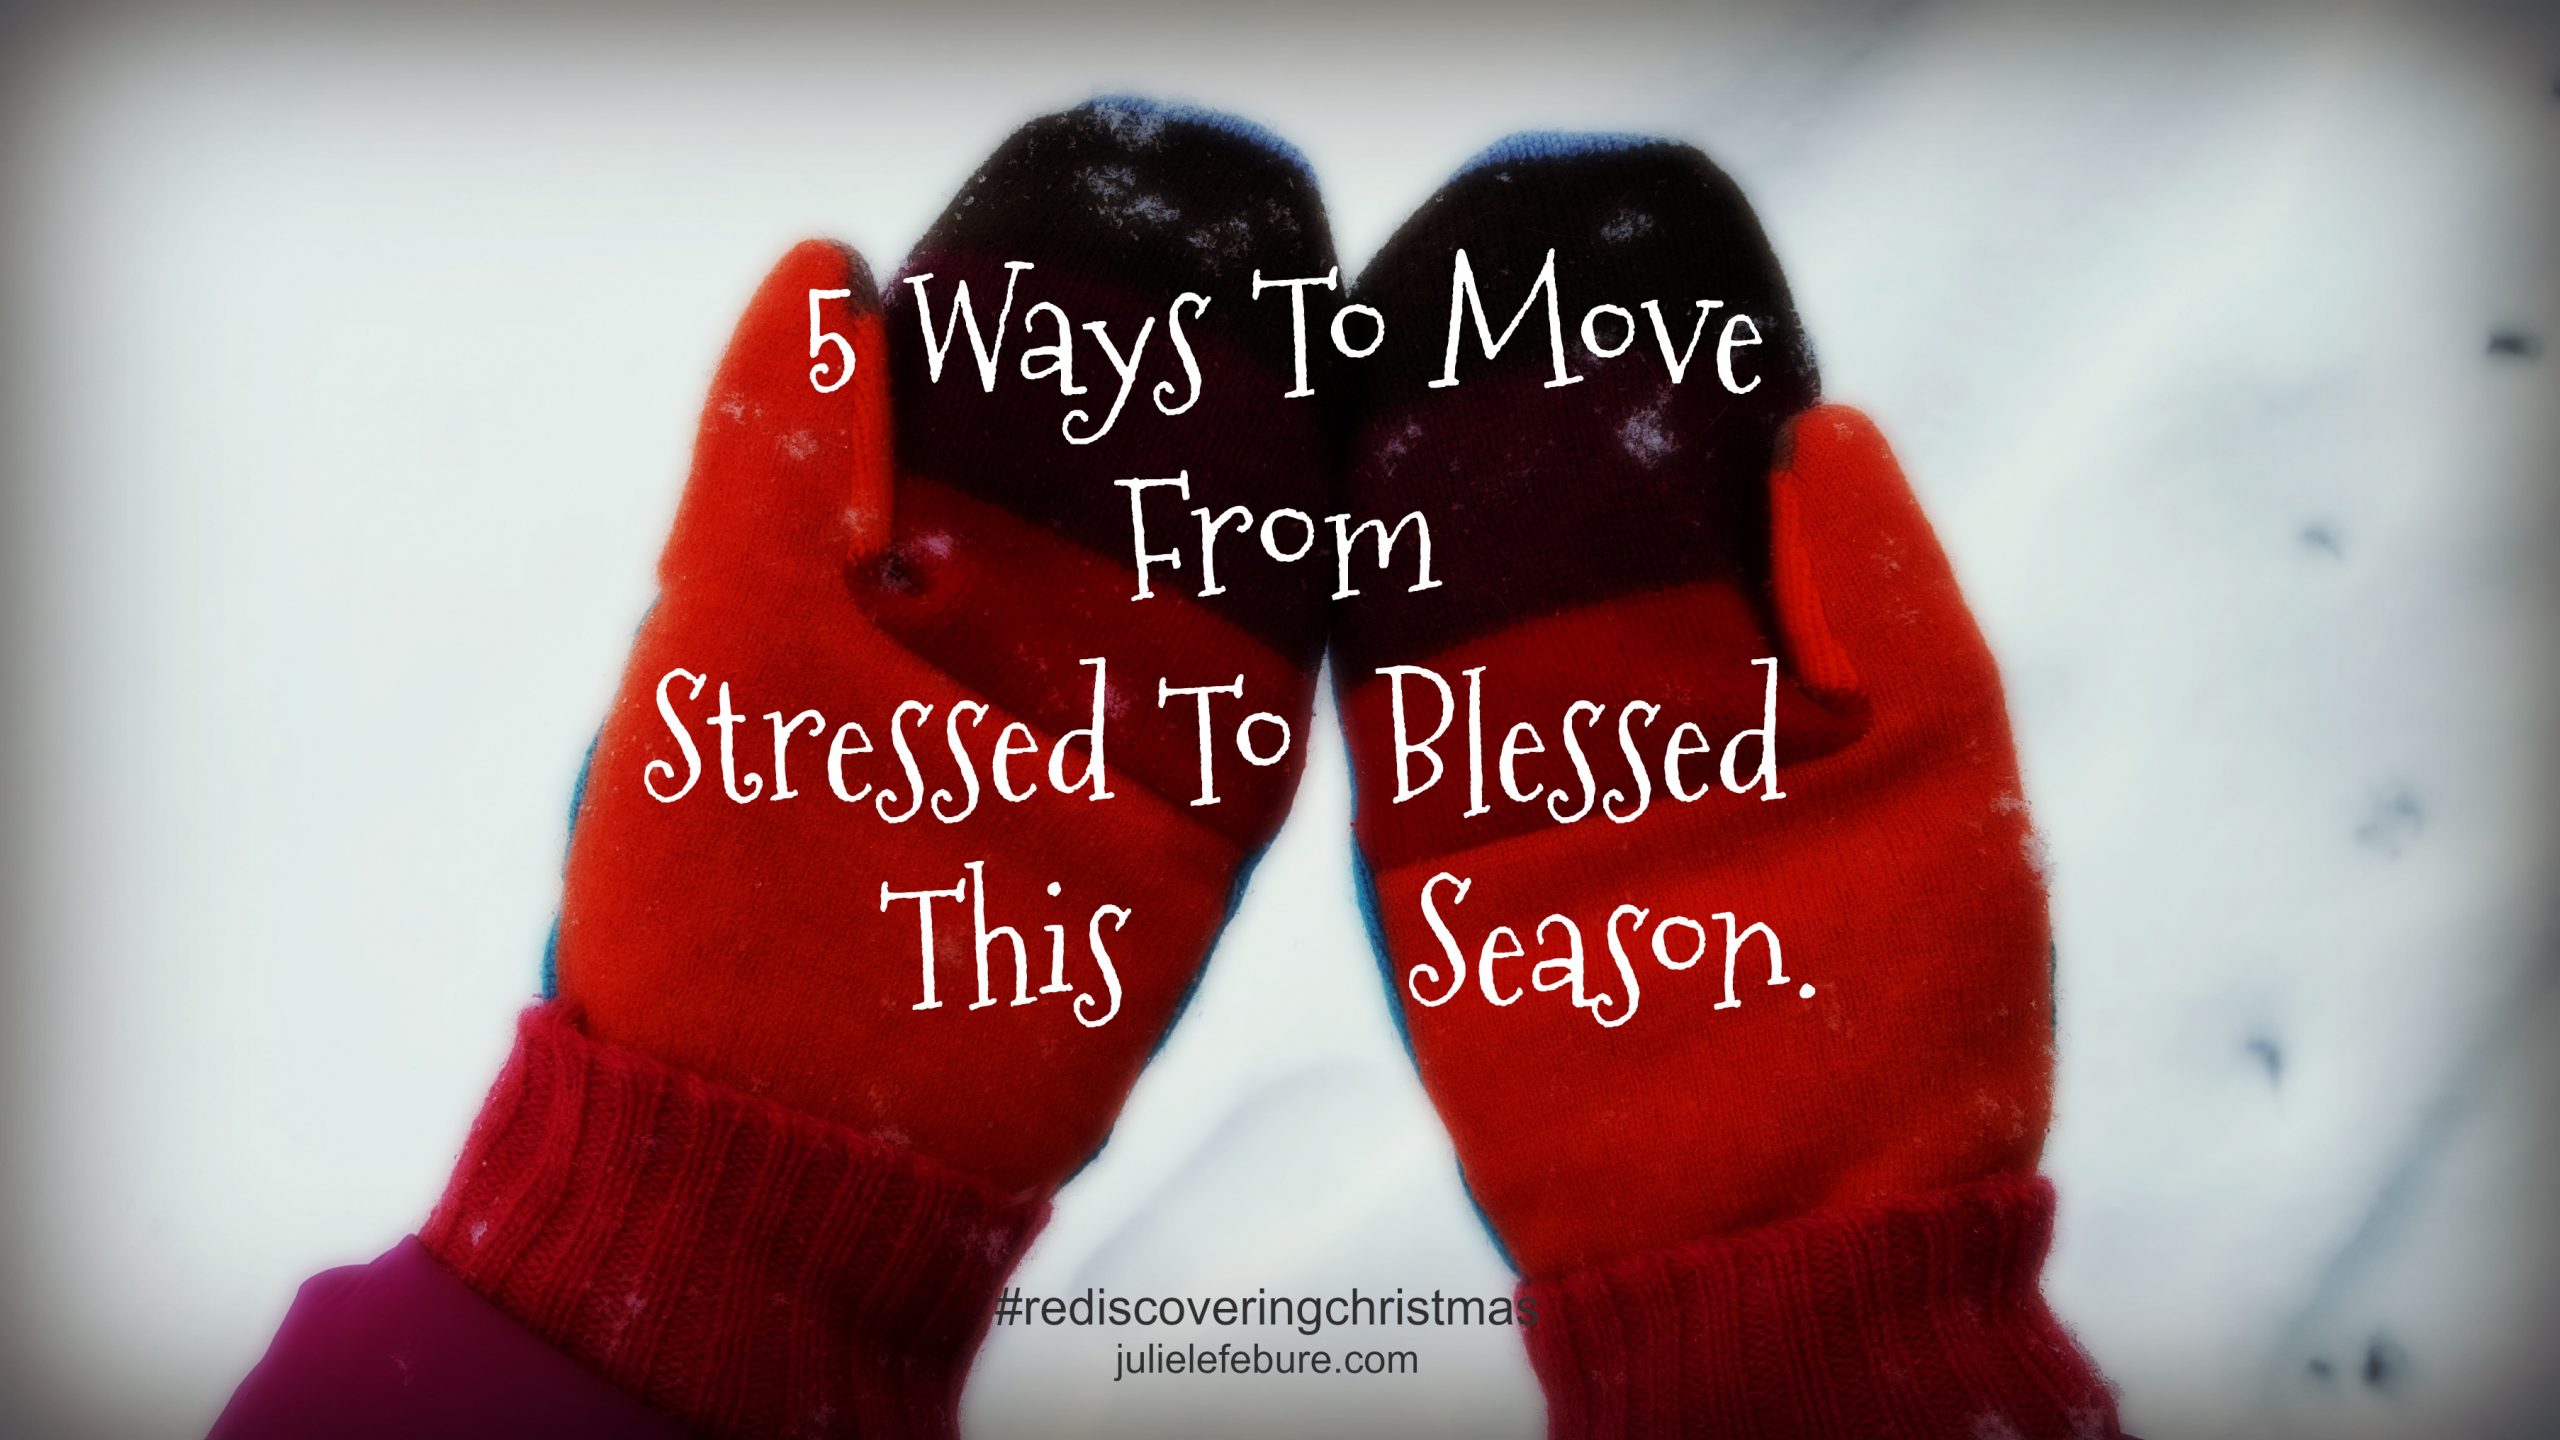 Rediscovering Christmas – From Stressed To Blessed